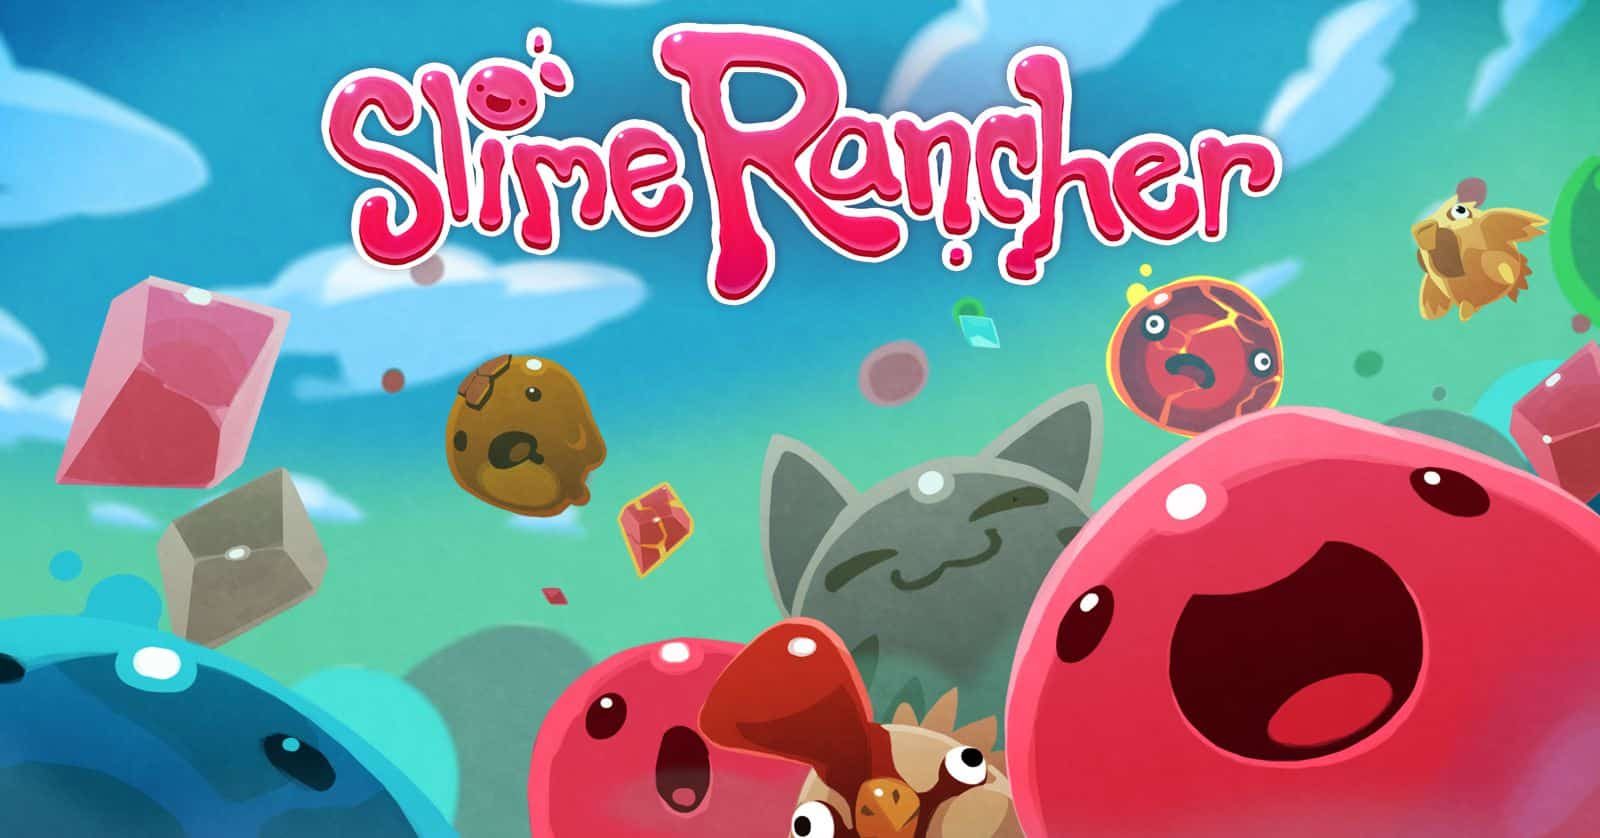 slime-rancher-best-games-like-pokemon-pc-console-5153232